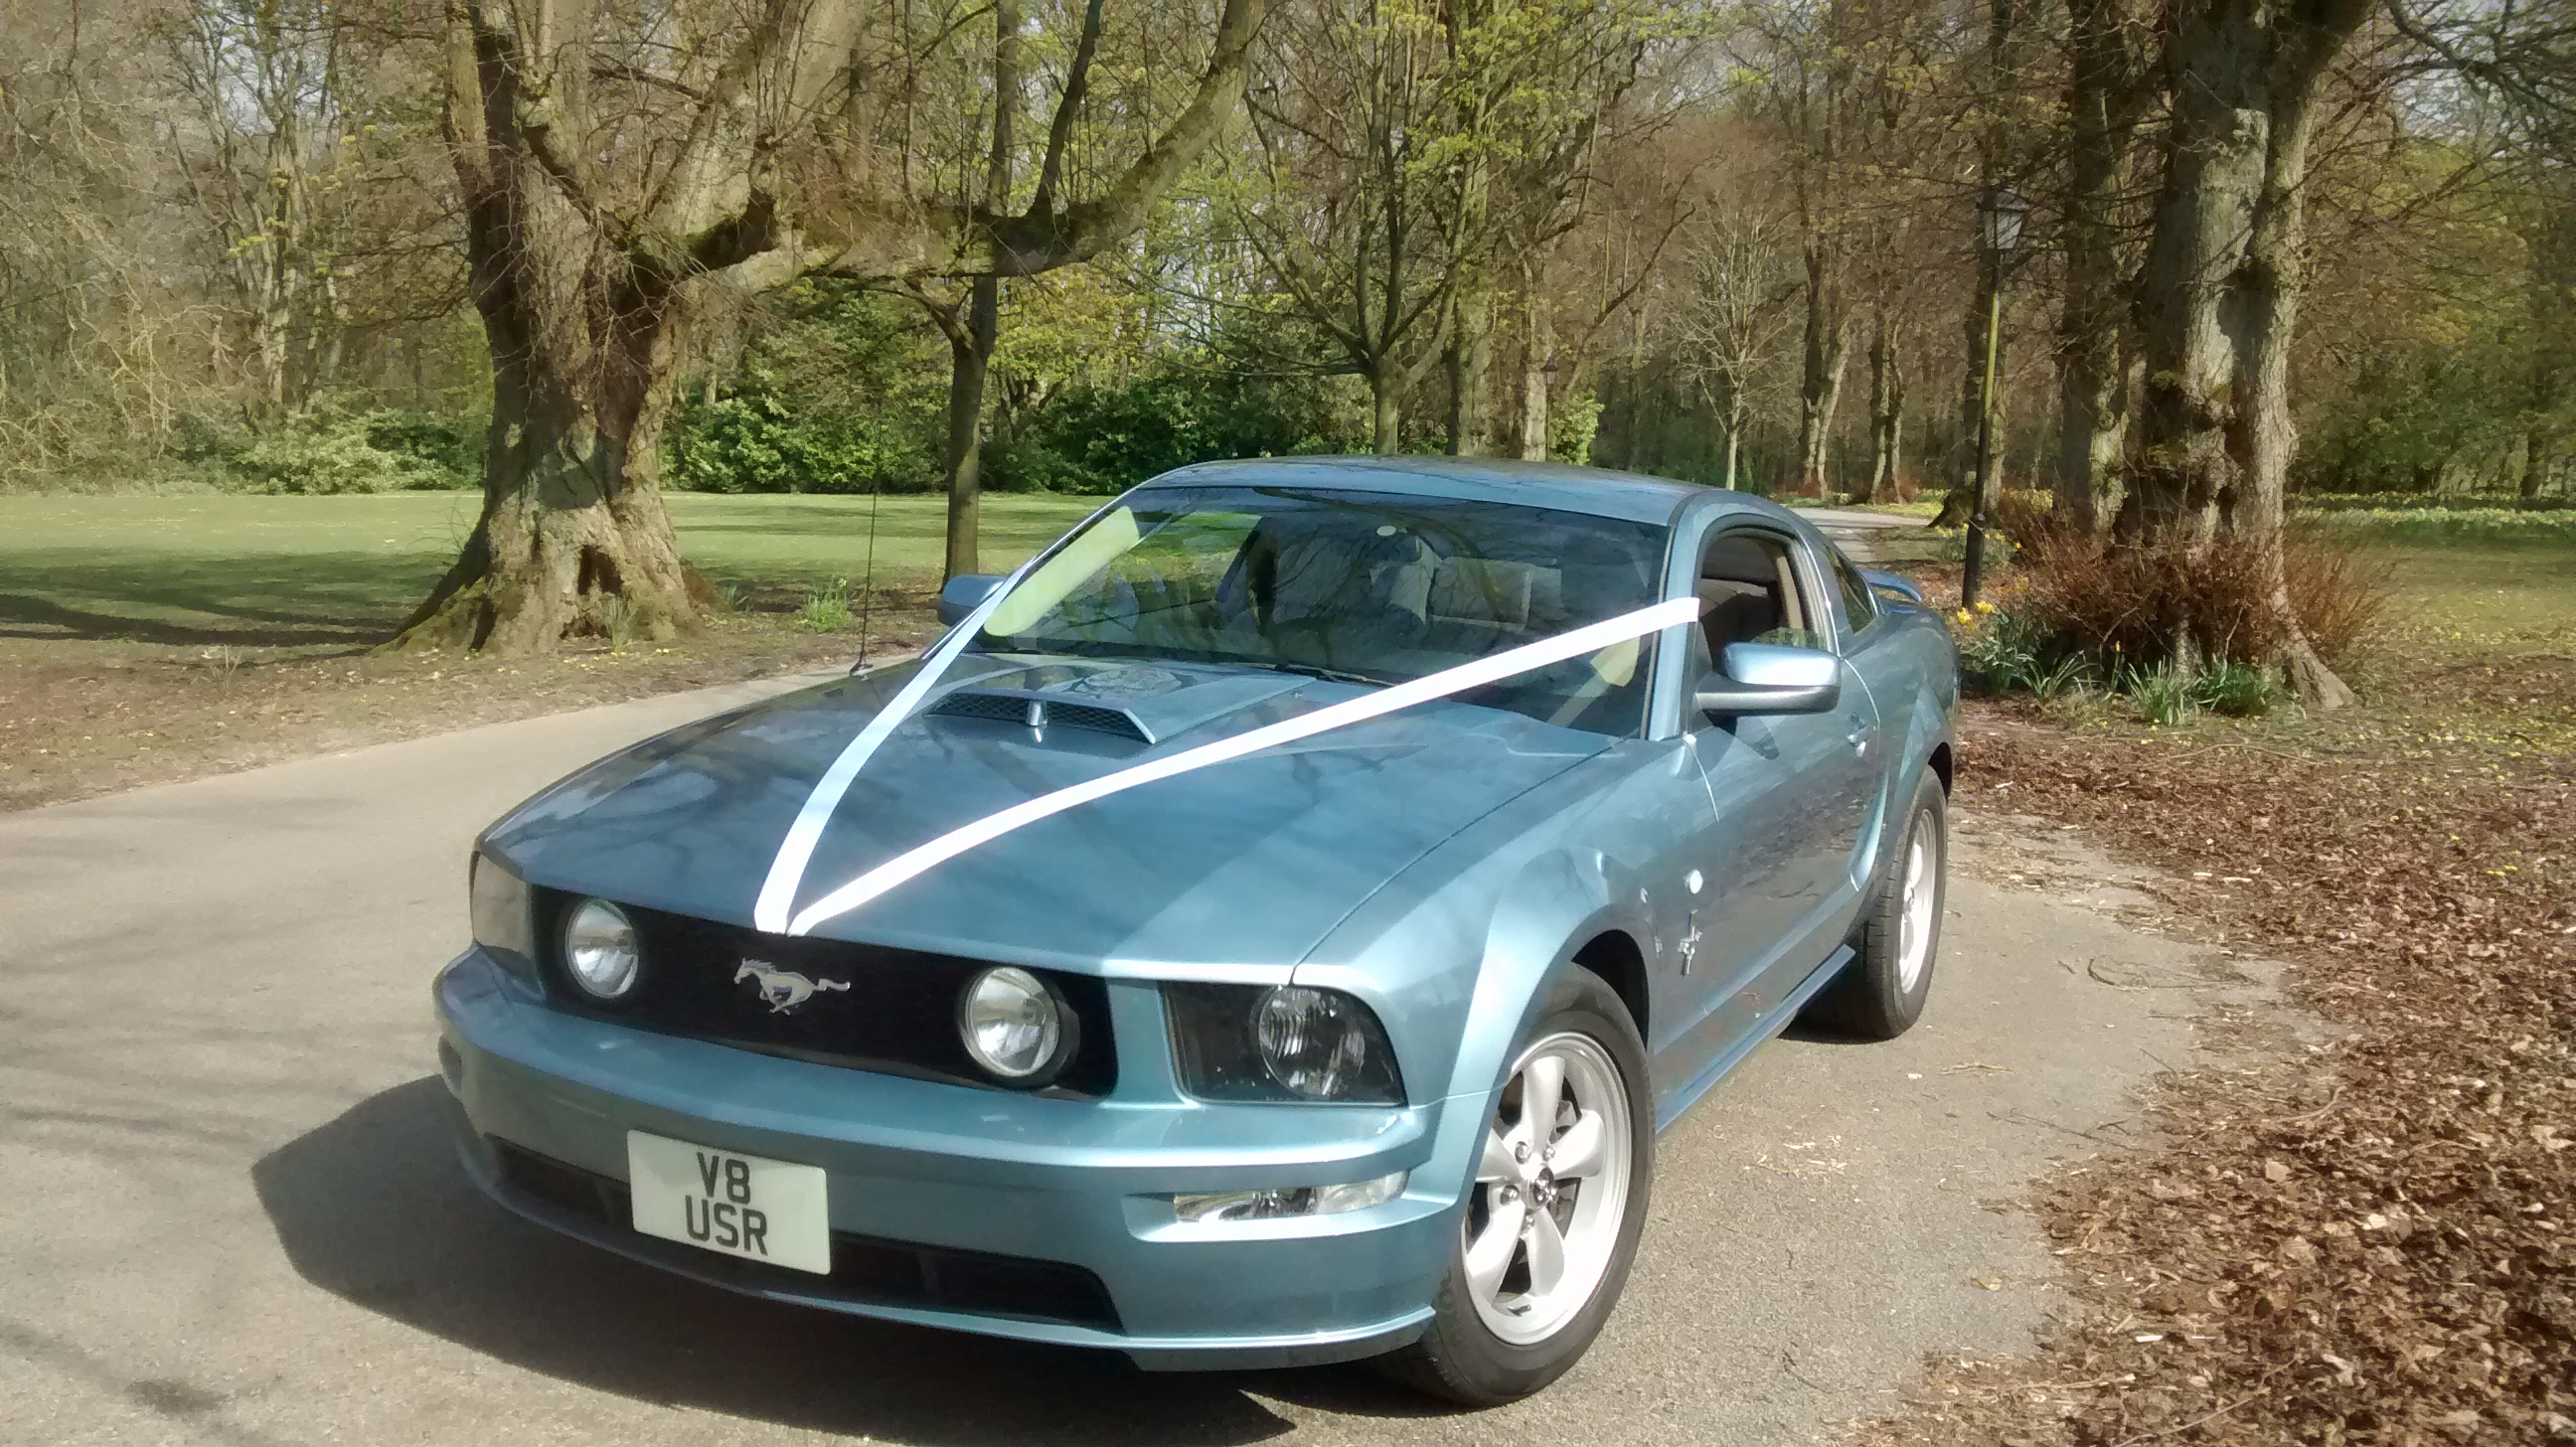 Ford Mustang V8 GT with ribbons